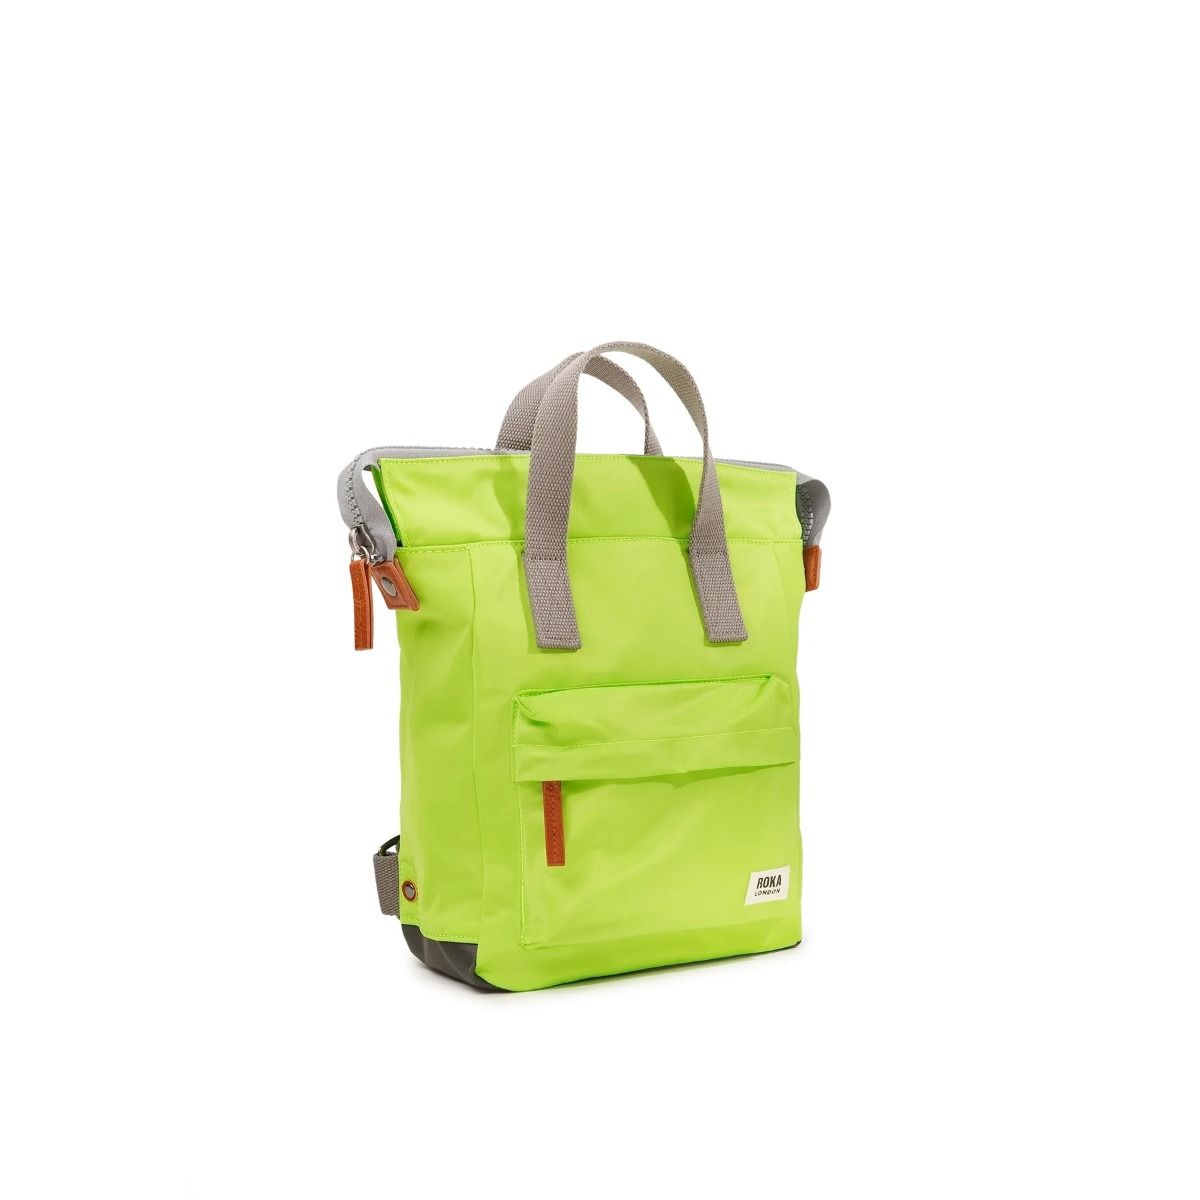 Roka Bantry B Small Bag in Lime side view